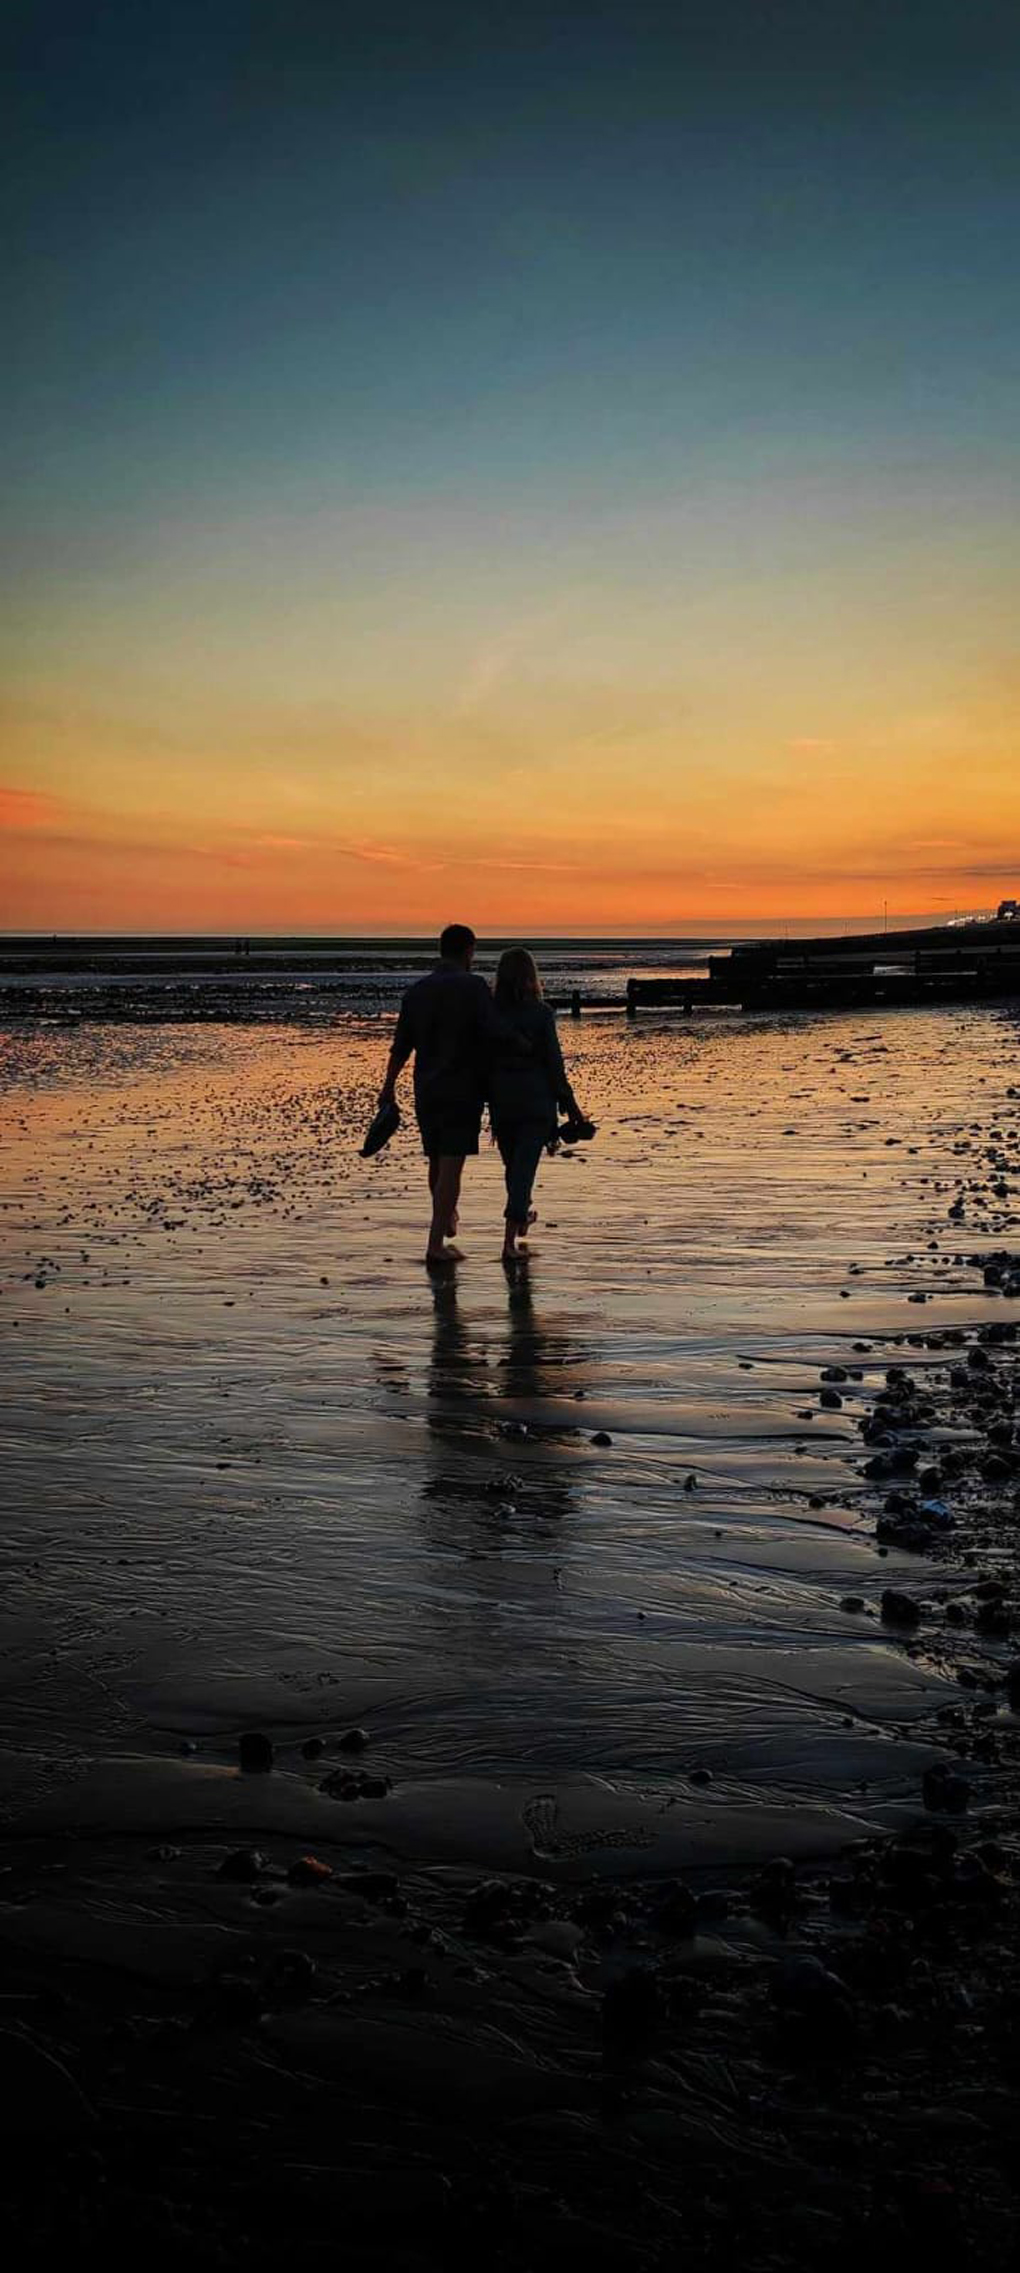 Two people walking on beach in sunset